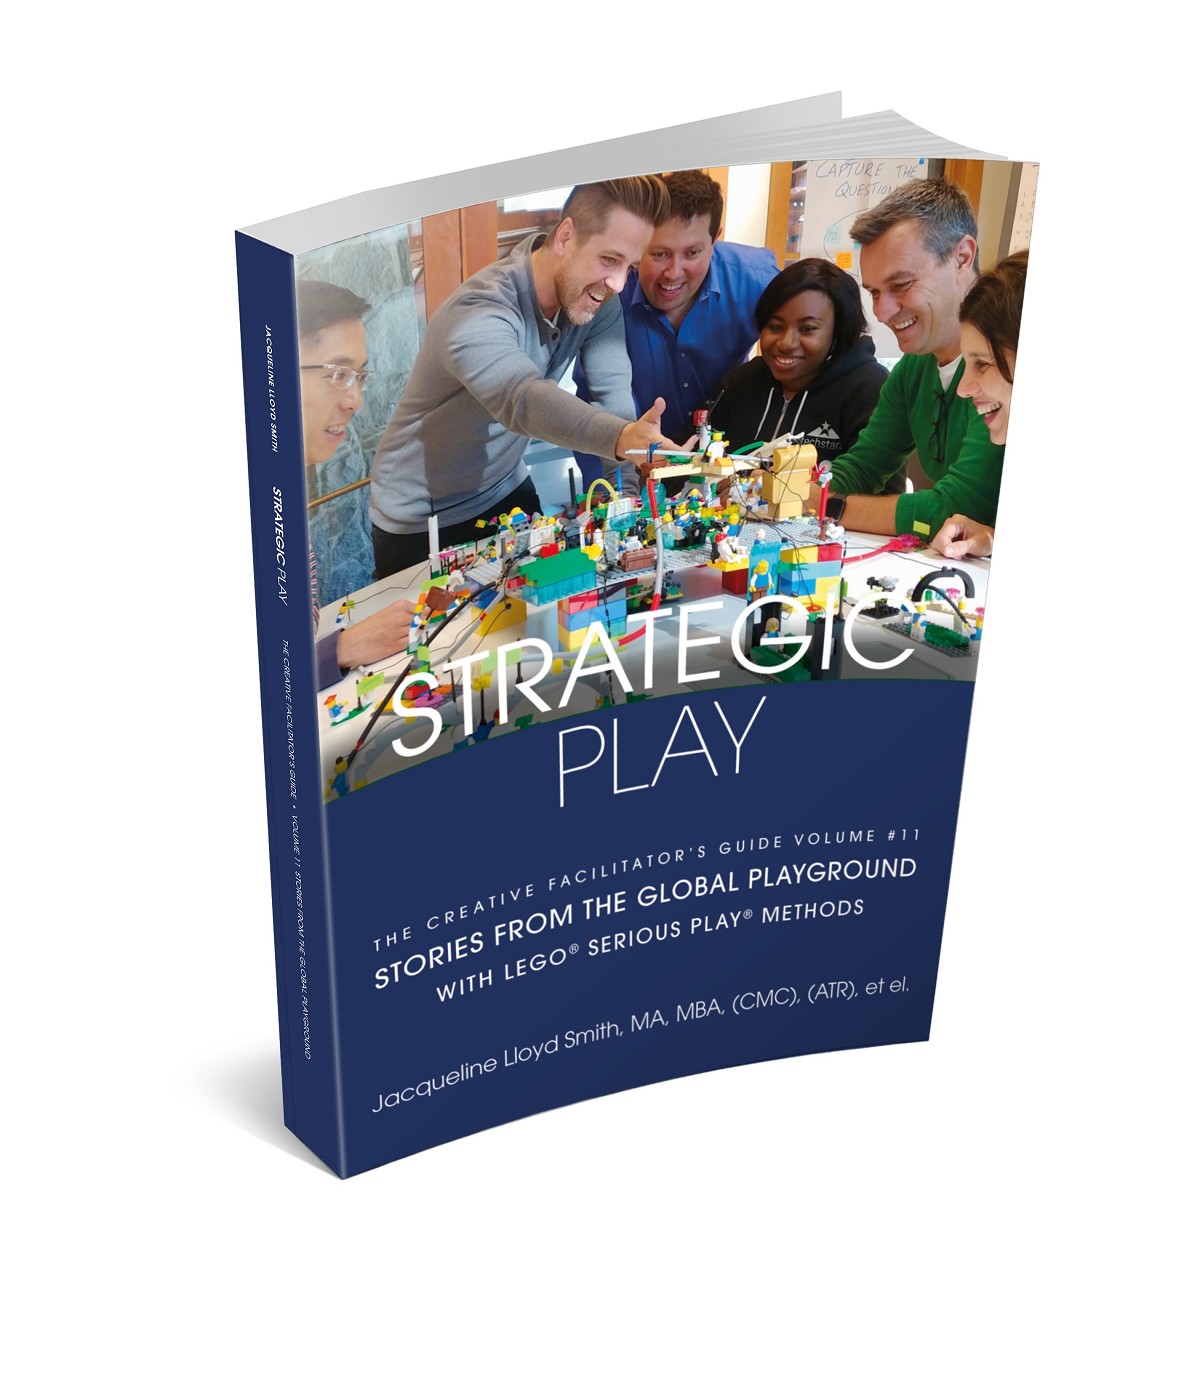 wzw-strategic-play-stories-from-the-glob